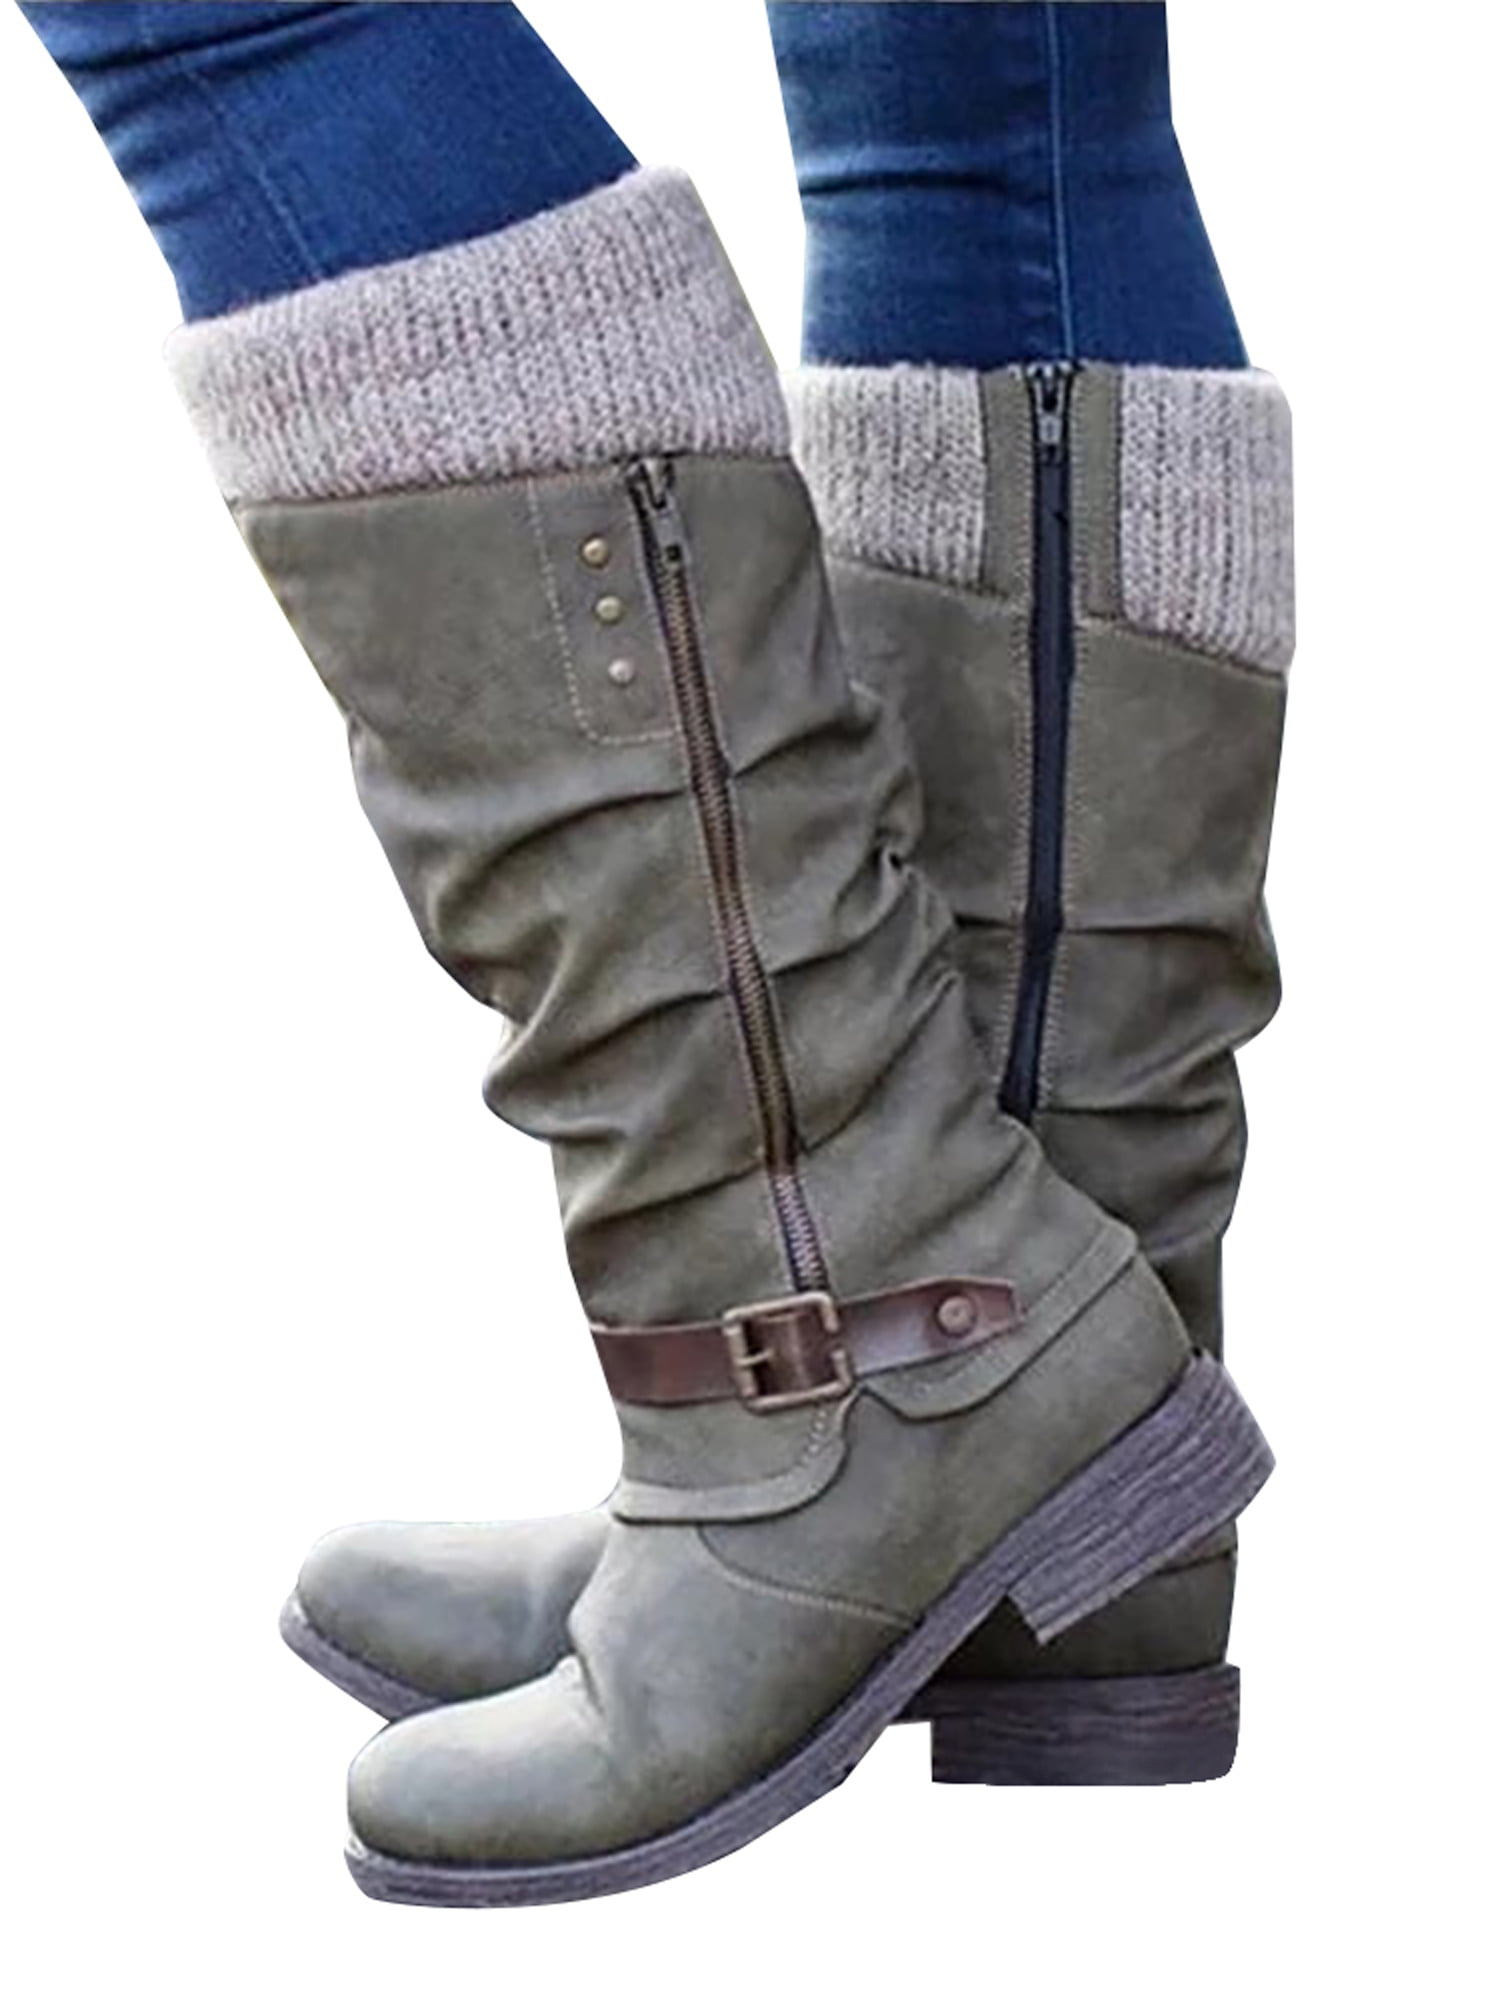 Ladies Calf Long Low Heel Casual Winter Stretch Biker Rider Boots Size 